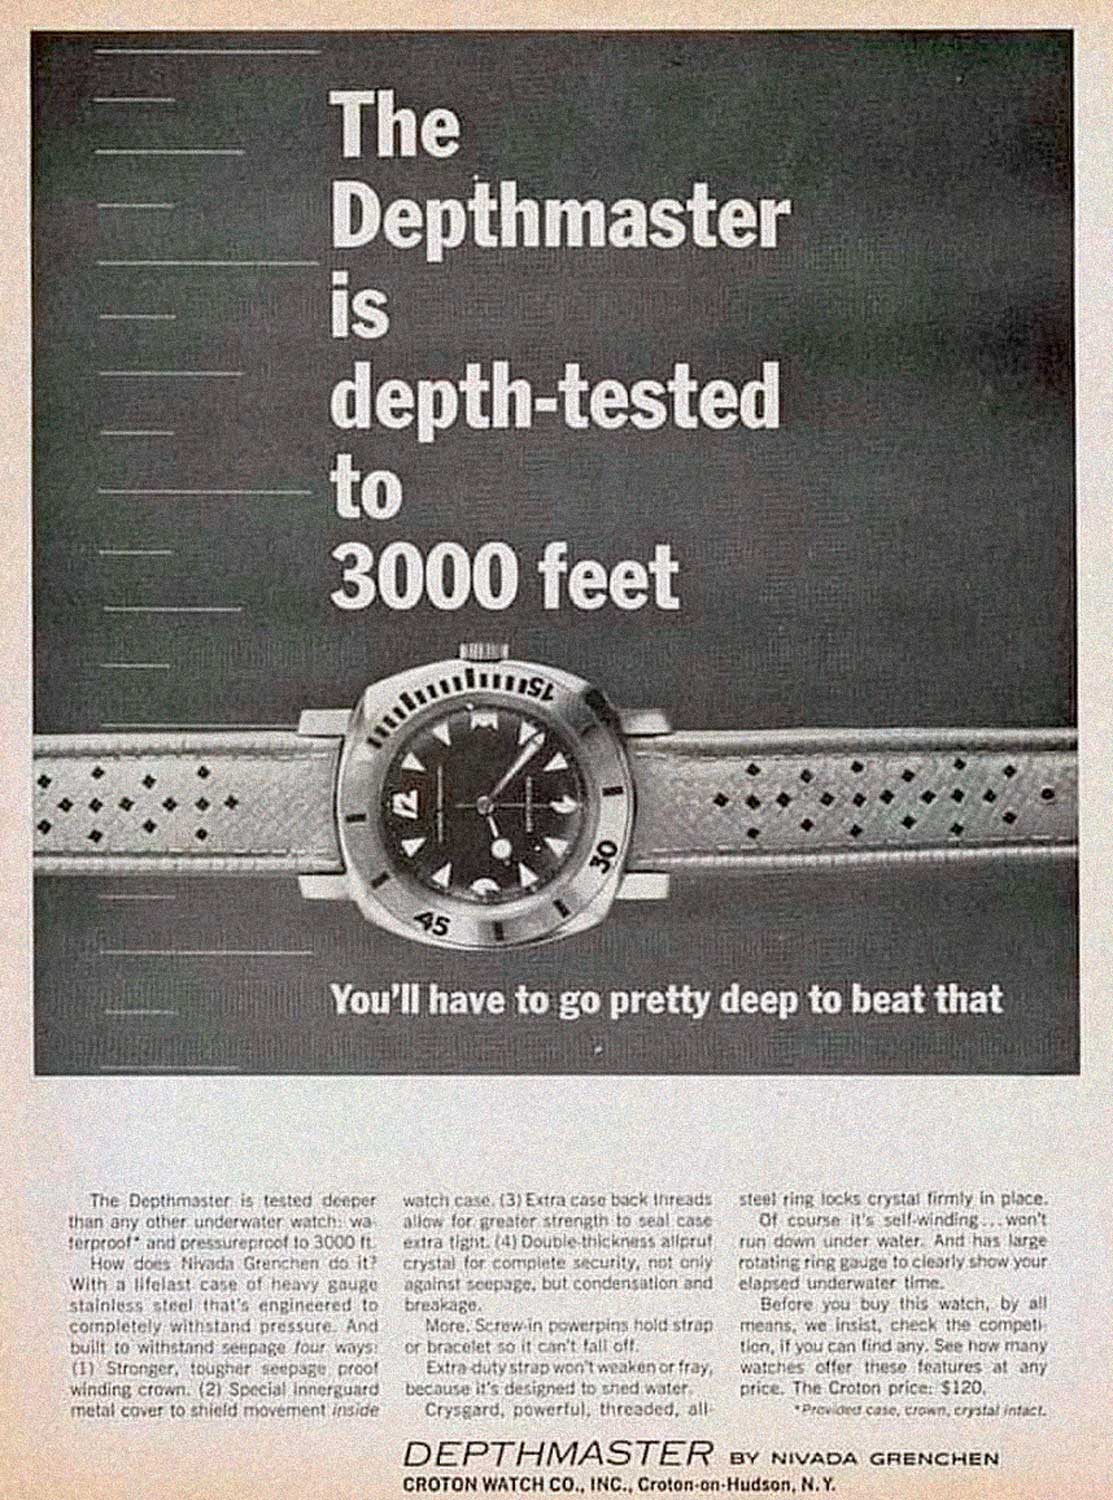 The vintage Depthmaster advertisement by Croton Watch Co.